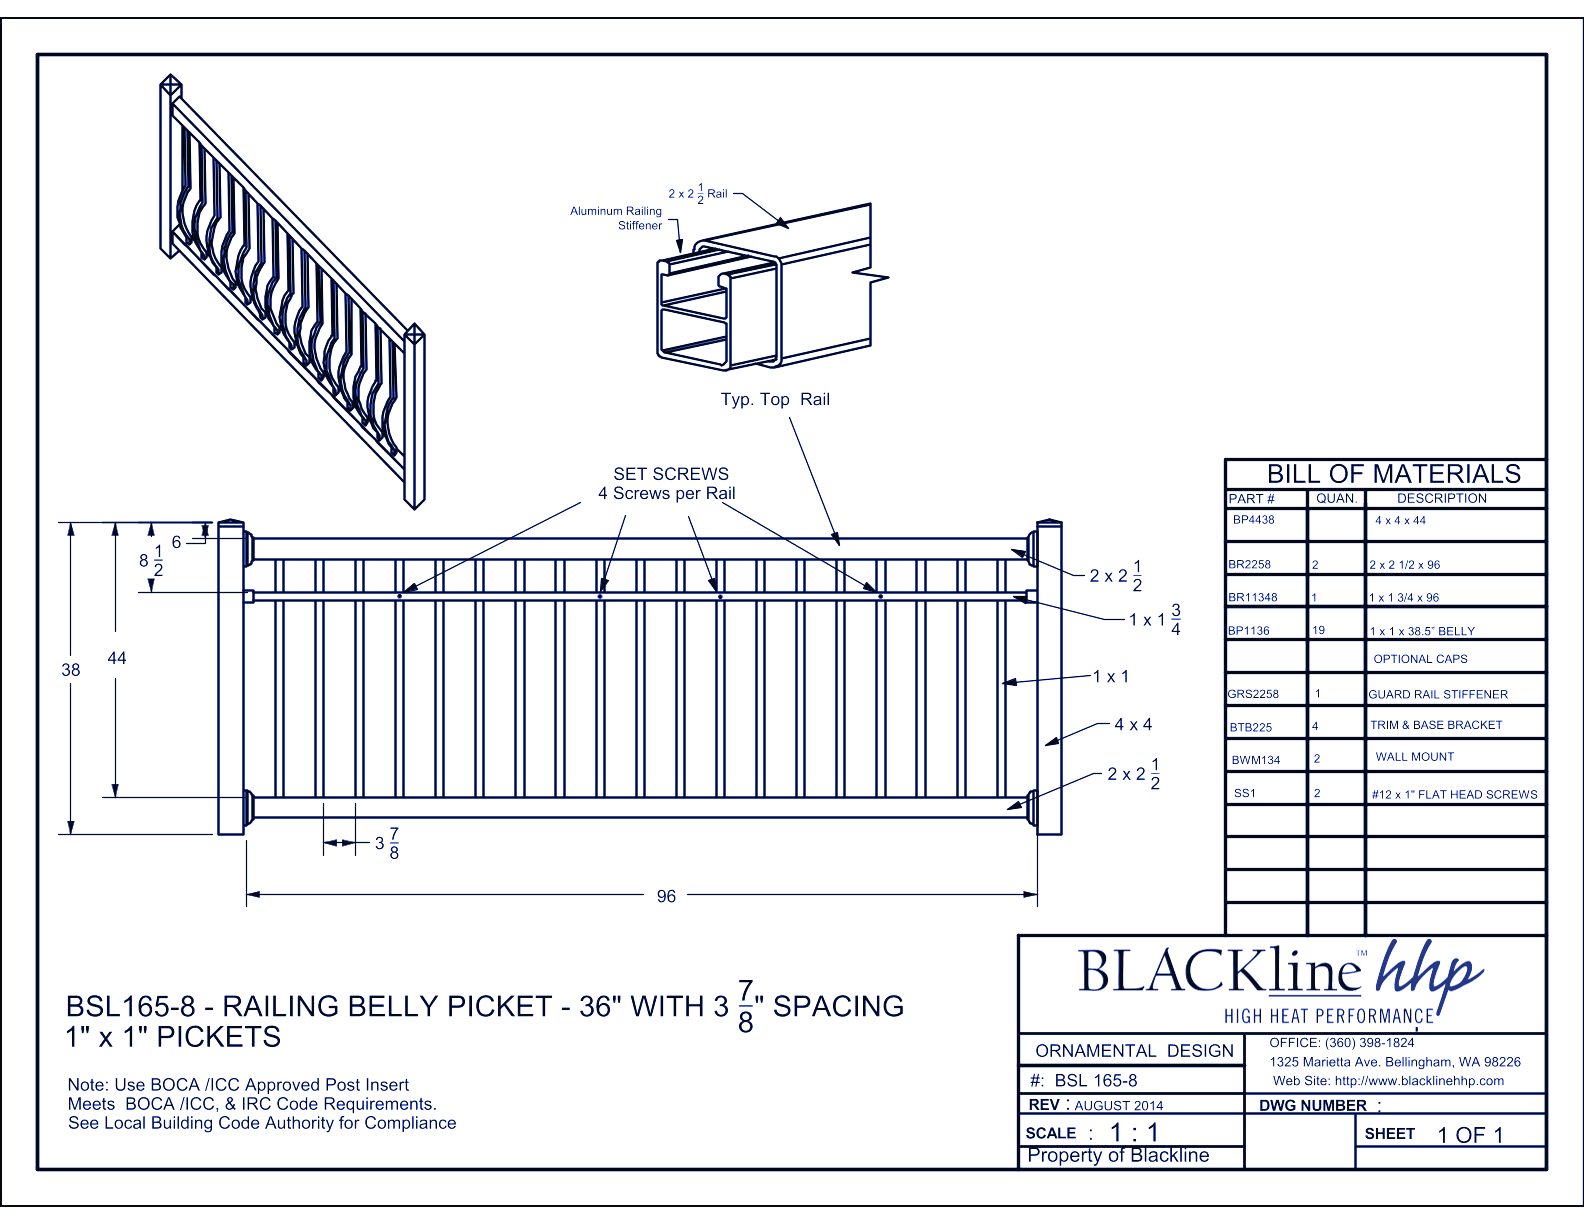 BSL165-8: Railing Belly Picket 36" with 3 7/8" Spacing - 1" x 1" Pickets